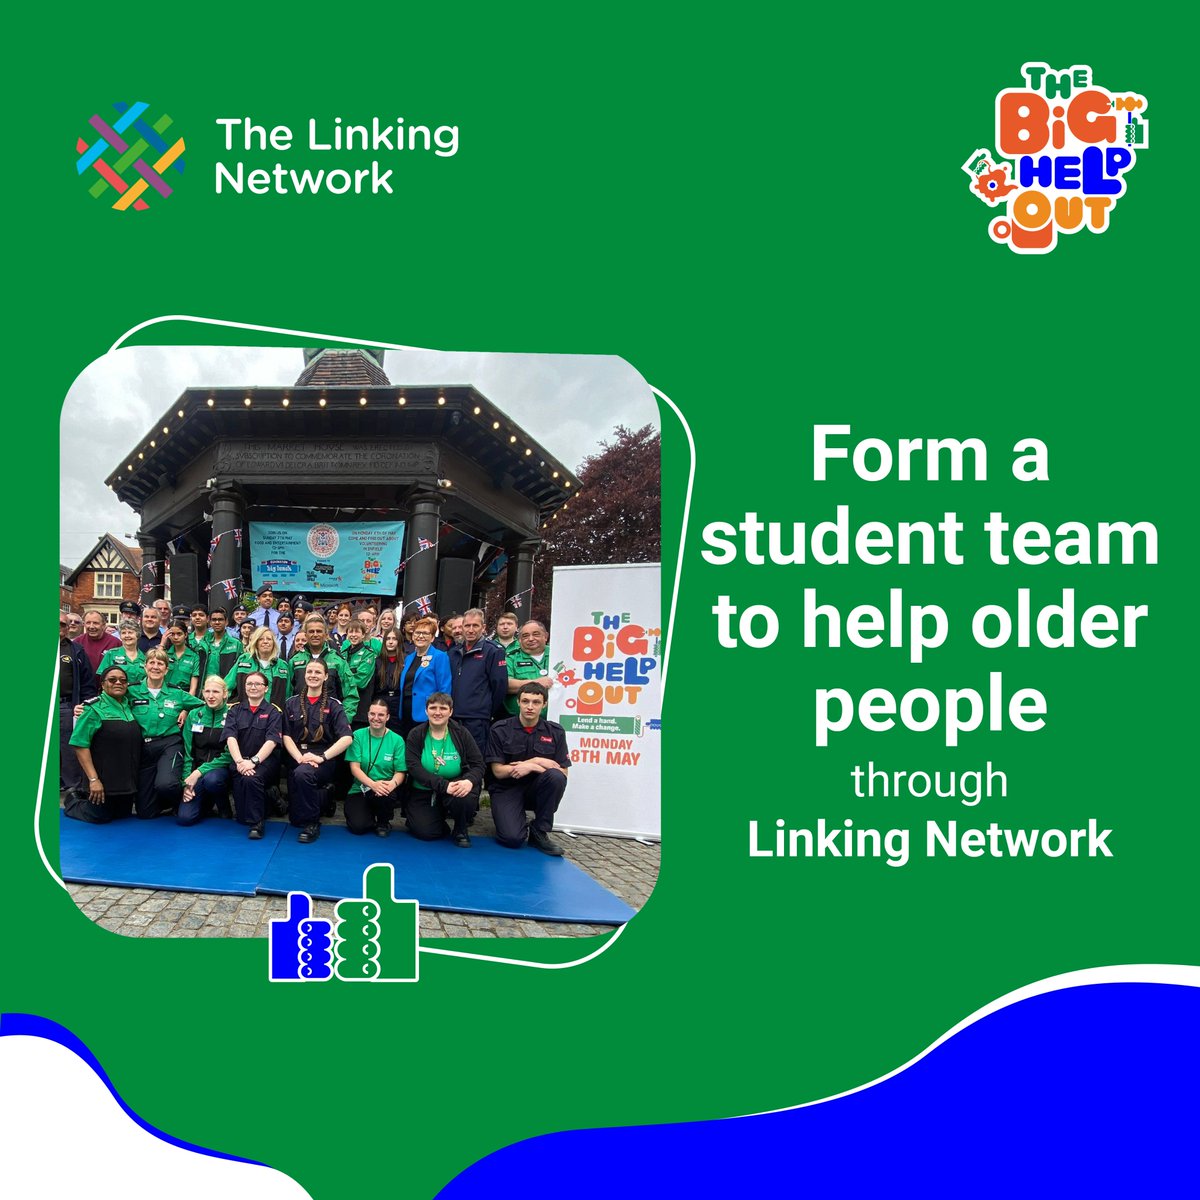 Delighted to partner with @Linking_Network to help young pupils befriend older people through sharing stories and in turn cultivating lasting relationships. 💚✋ Would your school or students be interested in this unique learning opportunity? Get involved bit.ly/bho-schools-x